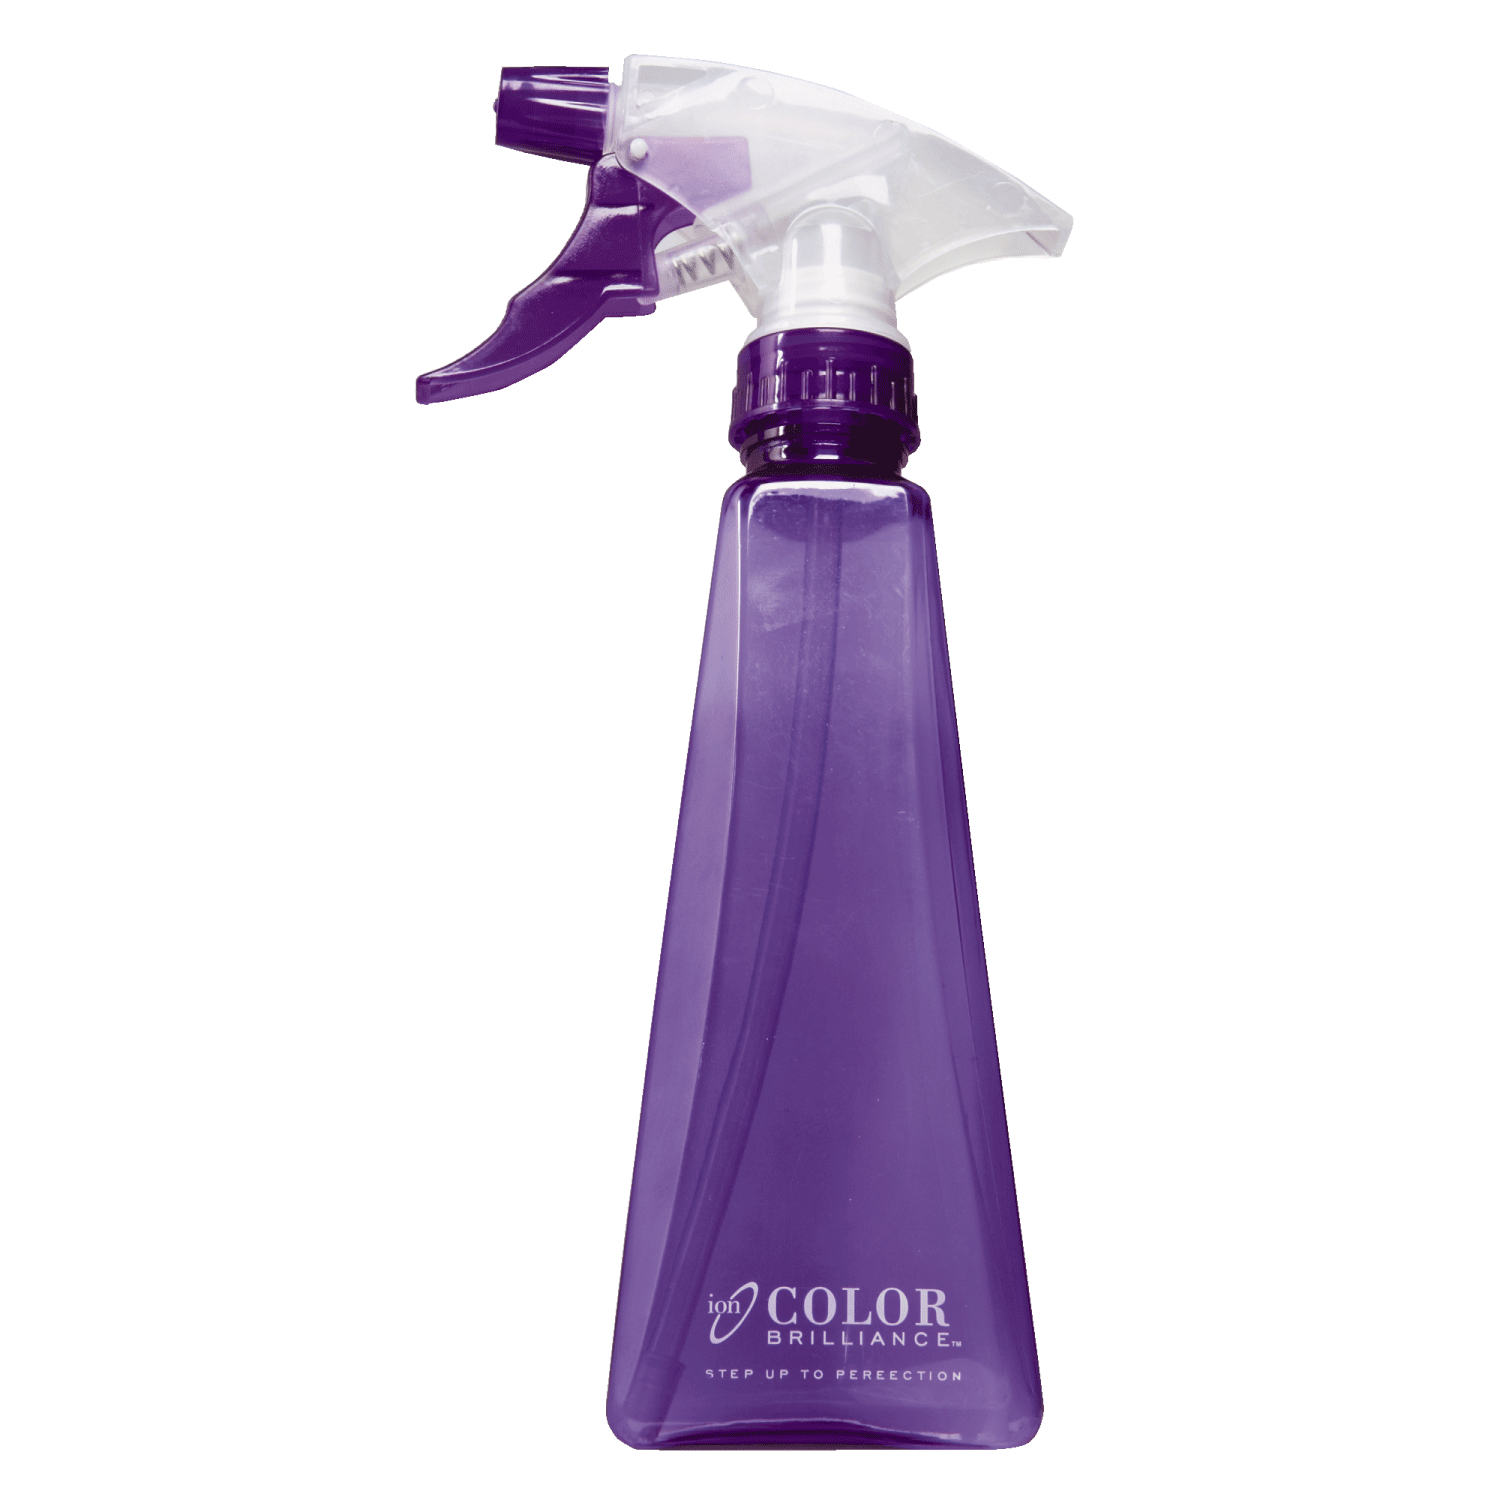 Spray bottle png. Ion color brilliance tapered